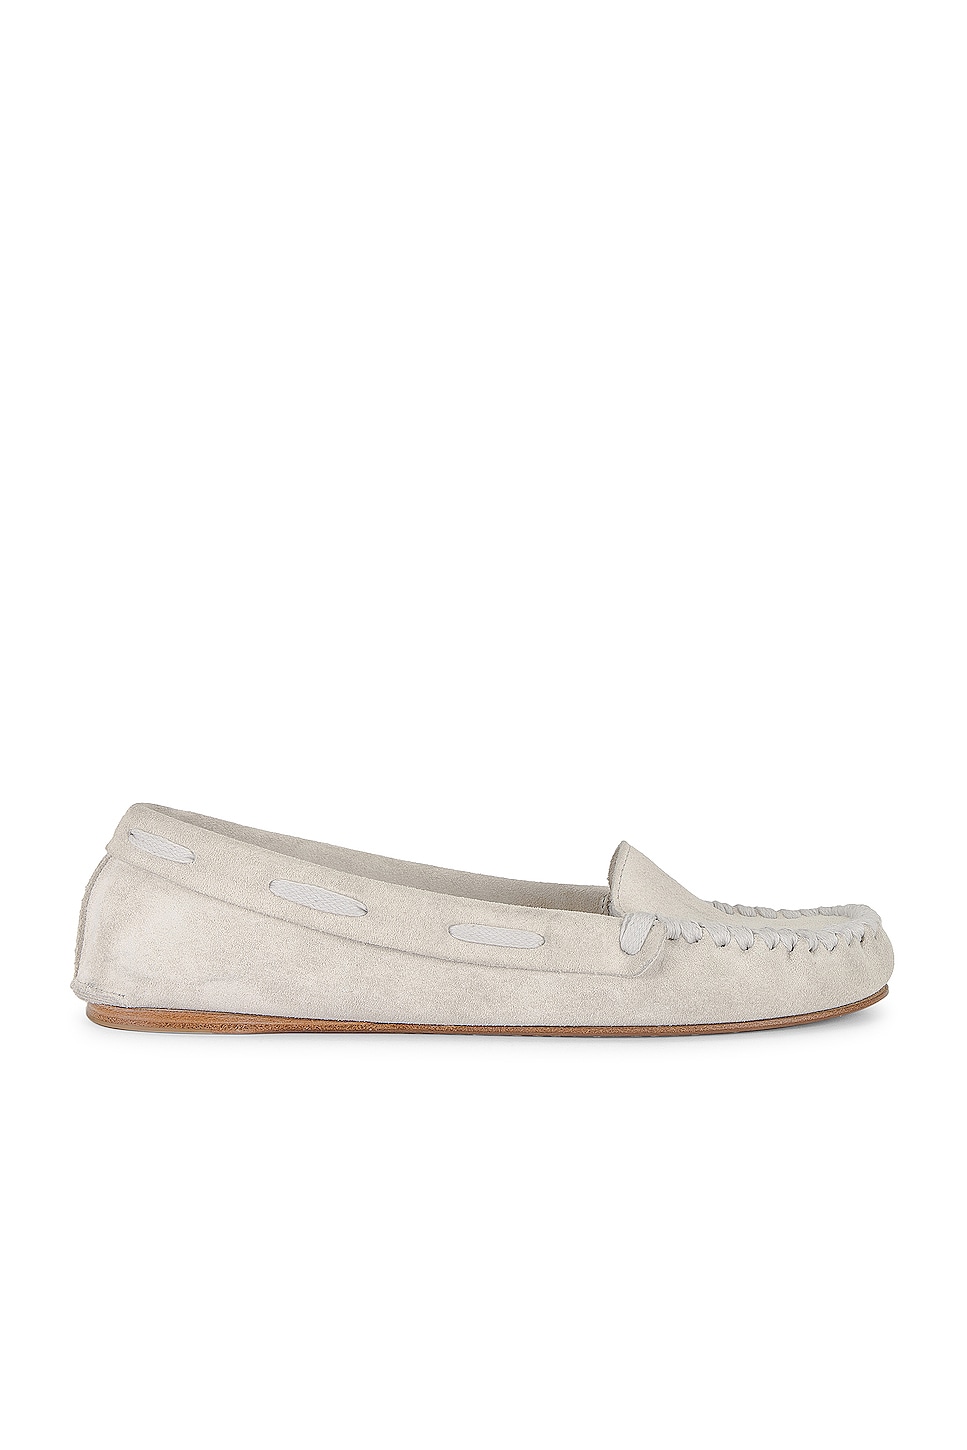 Image 1 of The Row Mabel Moc Loafer in Lamb